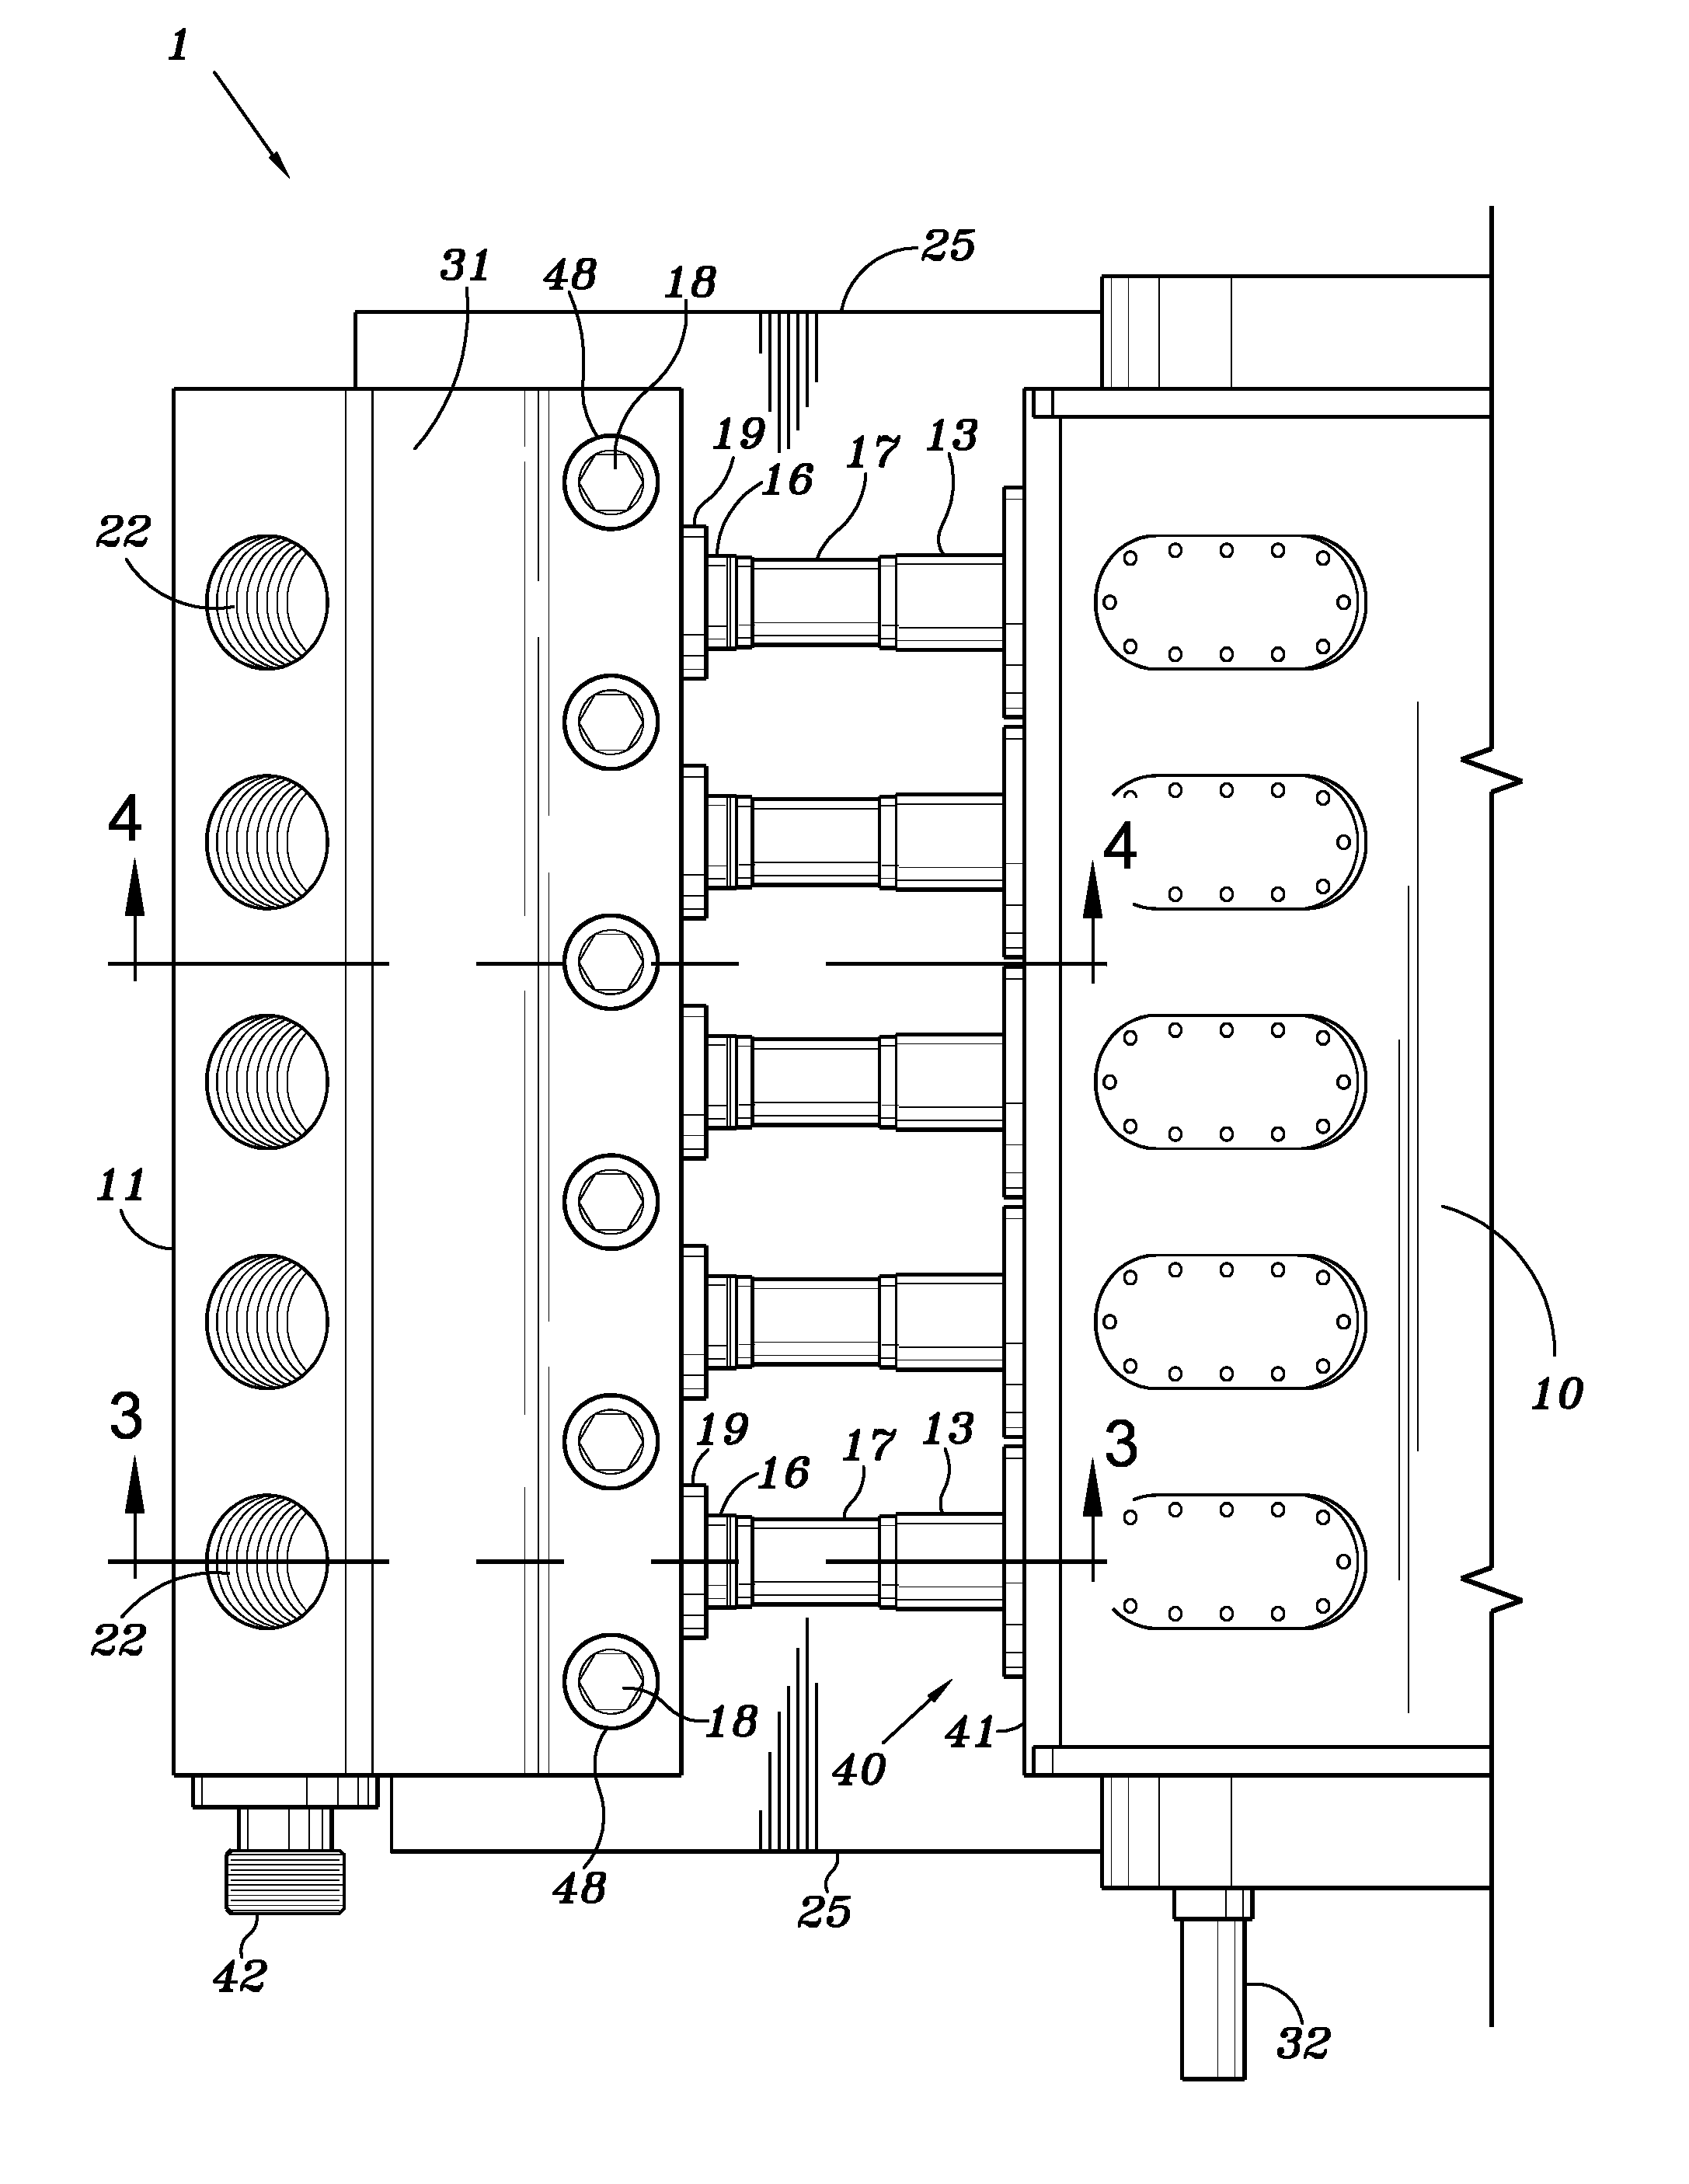 Support Mechanism for the Fluid End of a High Pressure Pump